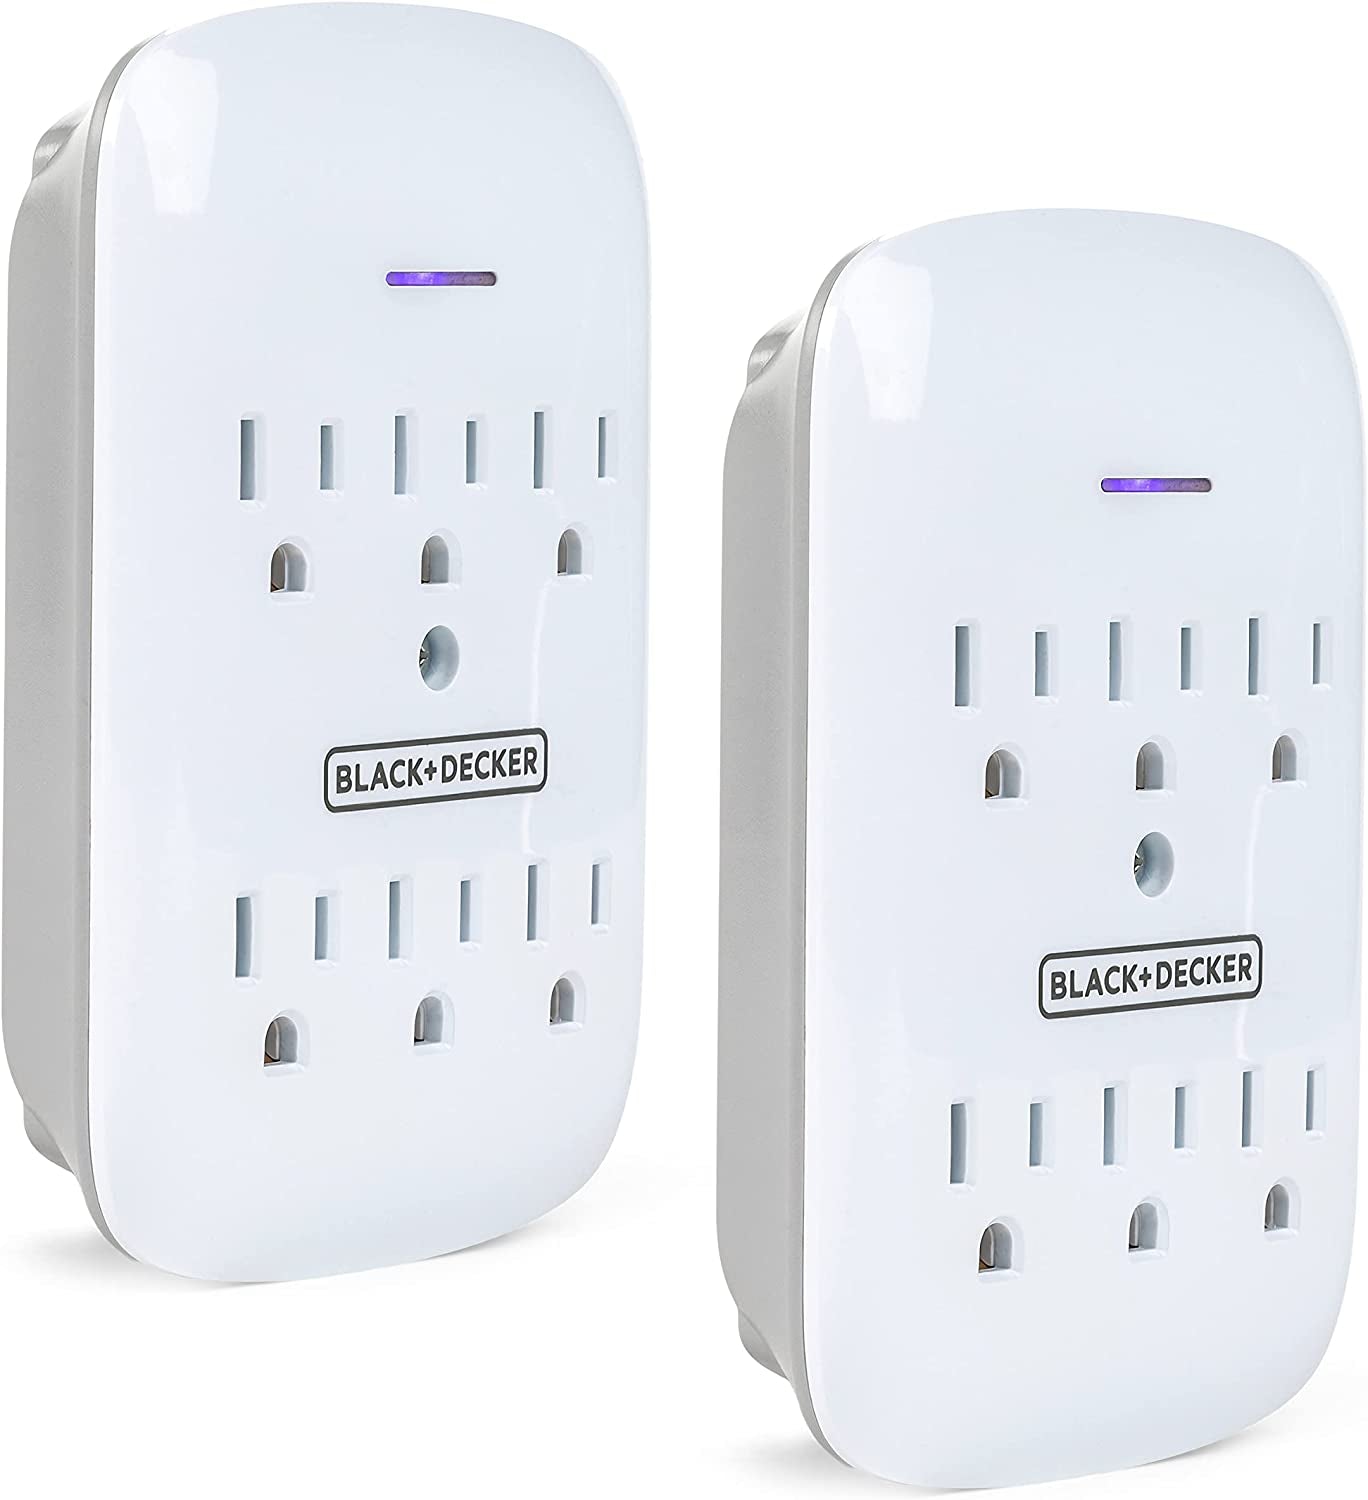 BLACK+DECKER Surge Protector Wall Mount with 6 Grounded Outlets, 2 Pack, White - Compact Power Adapter Tap with Indicator Light, Automatic Shutdown - 3-Prong Power Outlet Plug for Bathroom, Bedroom